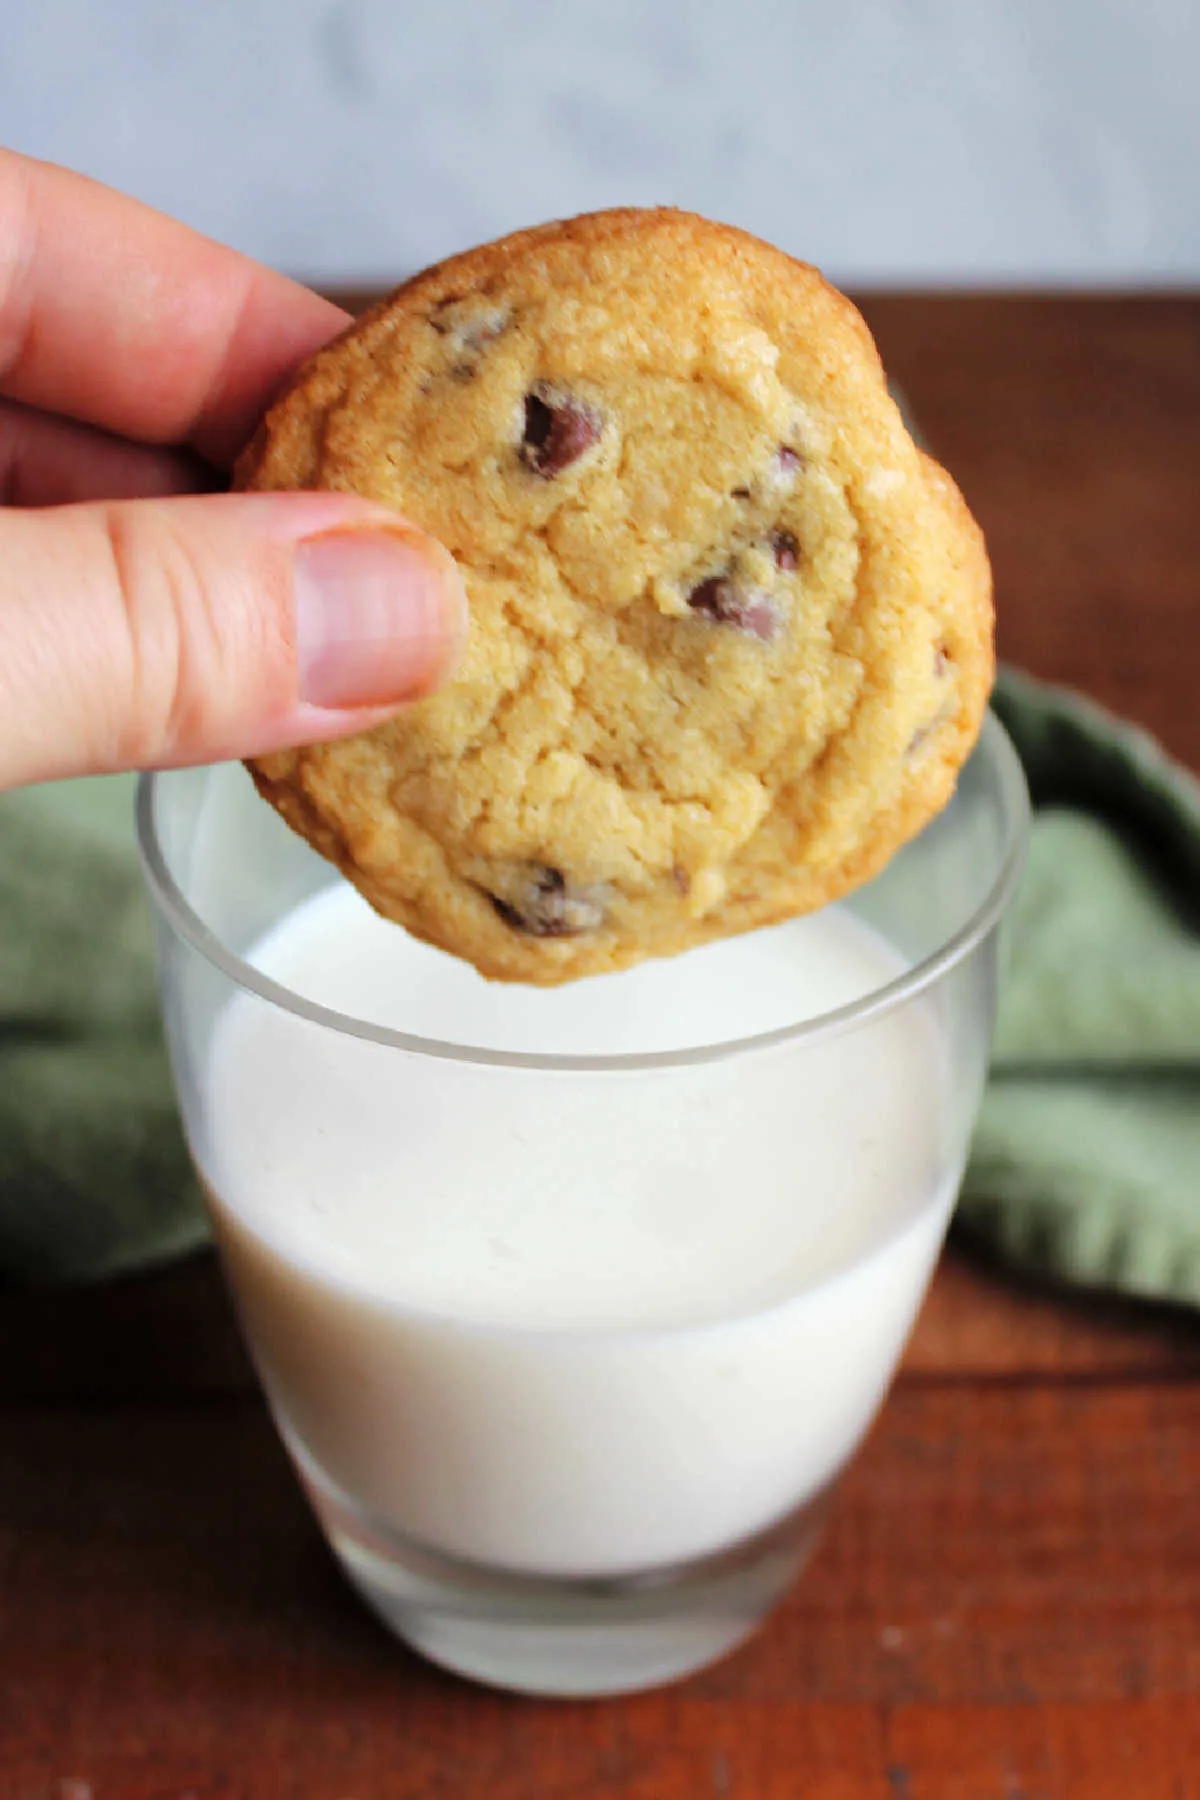 Hand dipping chocolate chip cookie into a glass of milk.